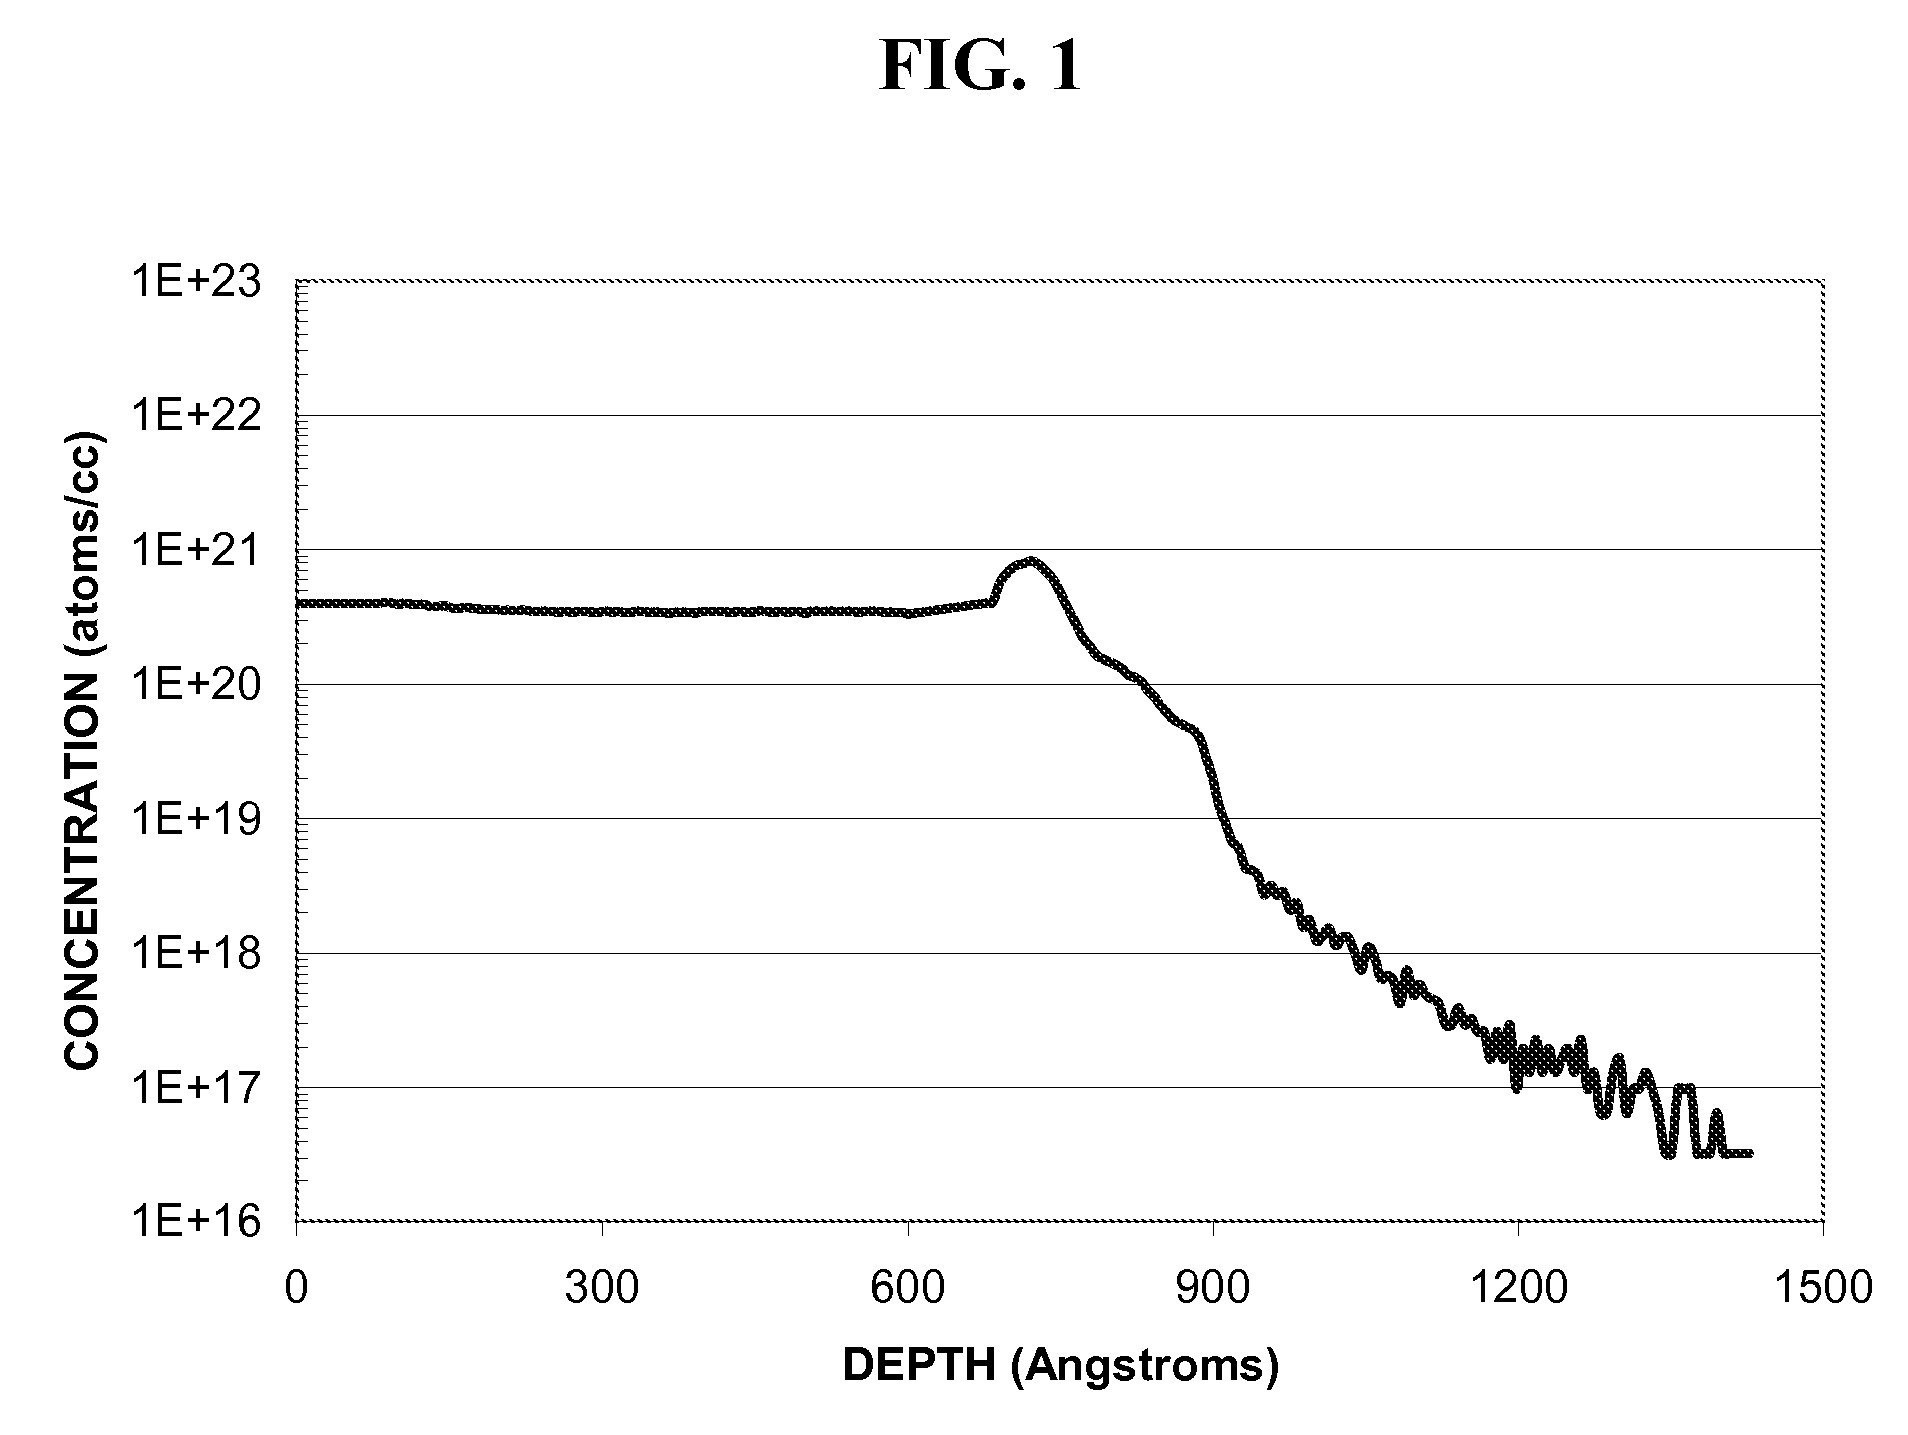 Methods of forming a doped semiconductor thin film, doped semiconductor thin film structures, doped silane compositions, and methods of making such compositions